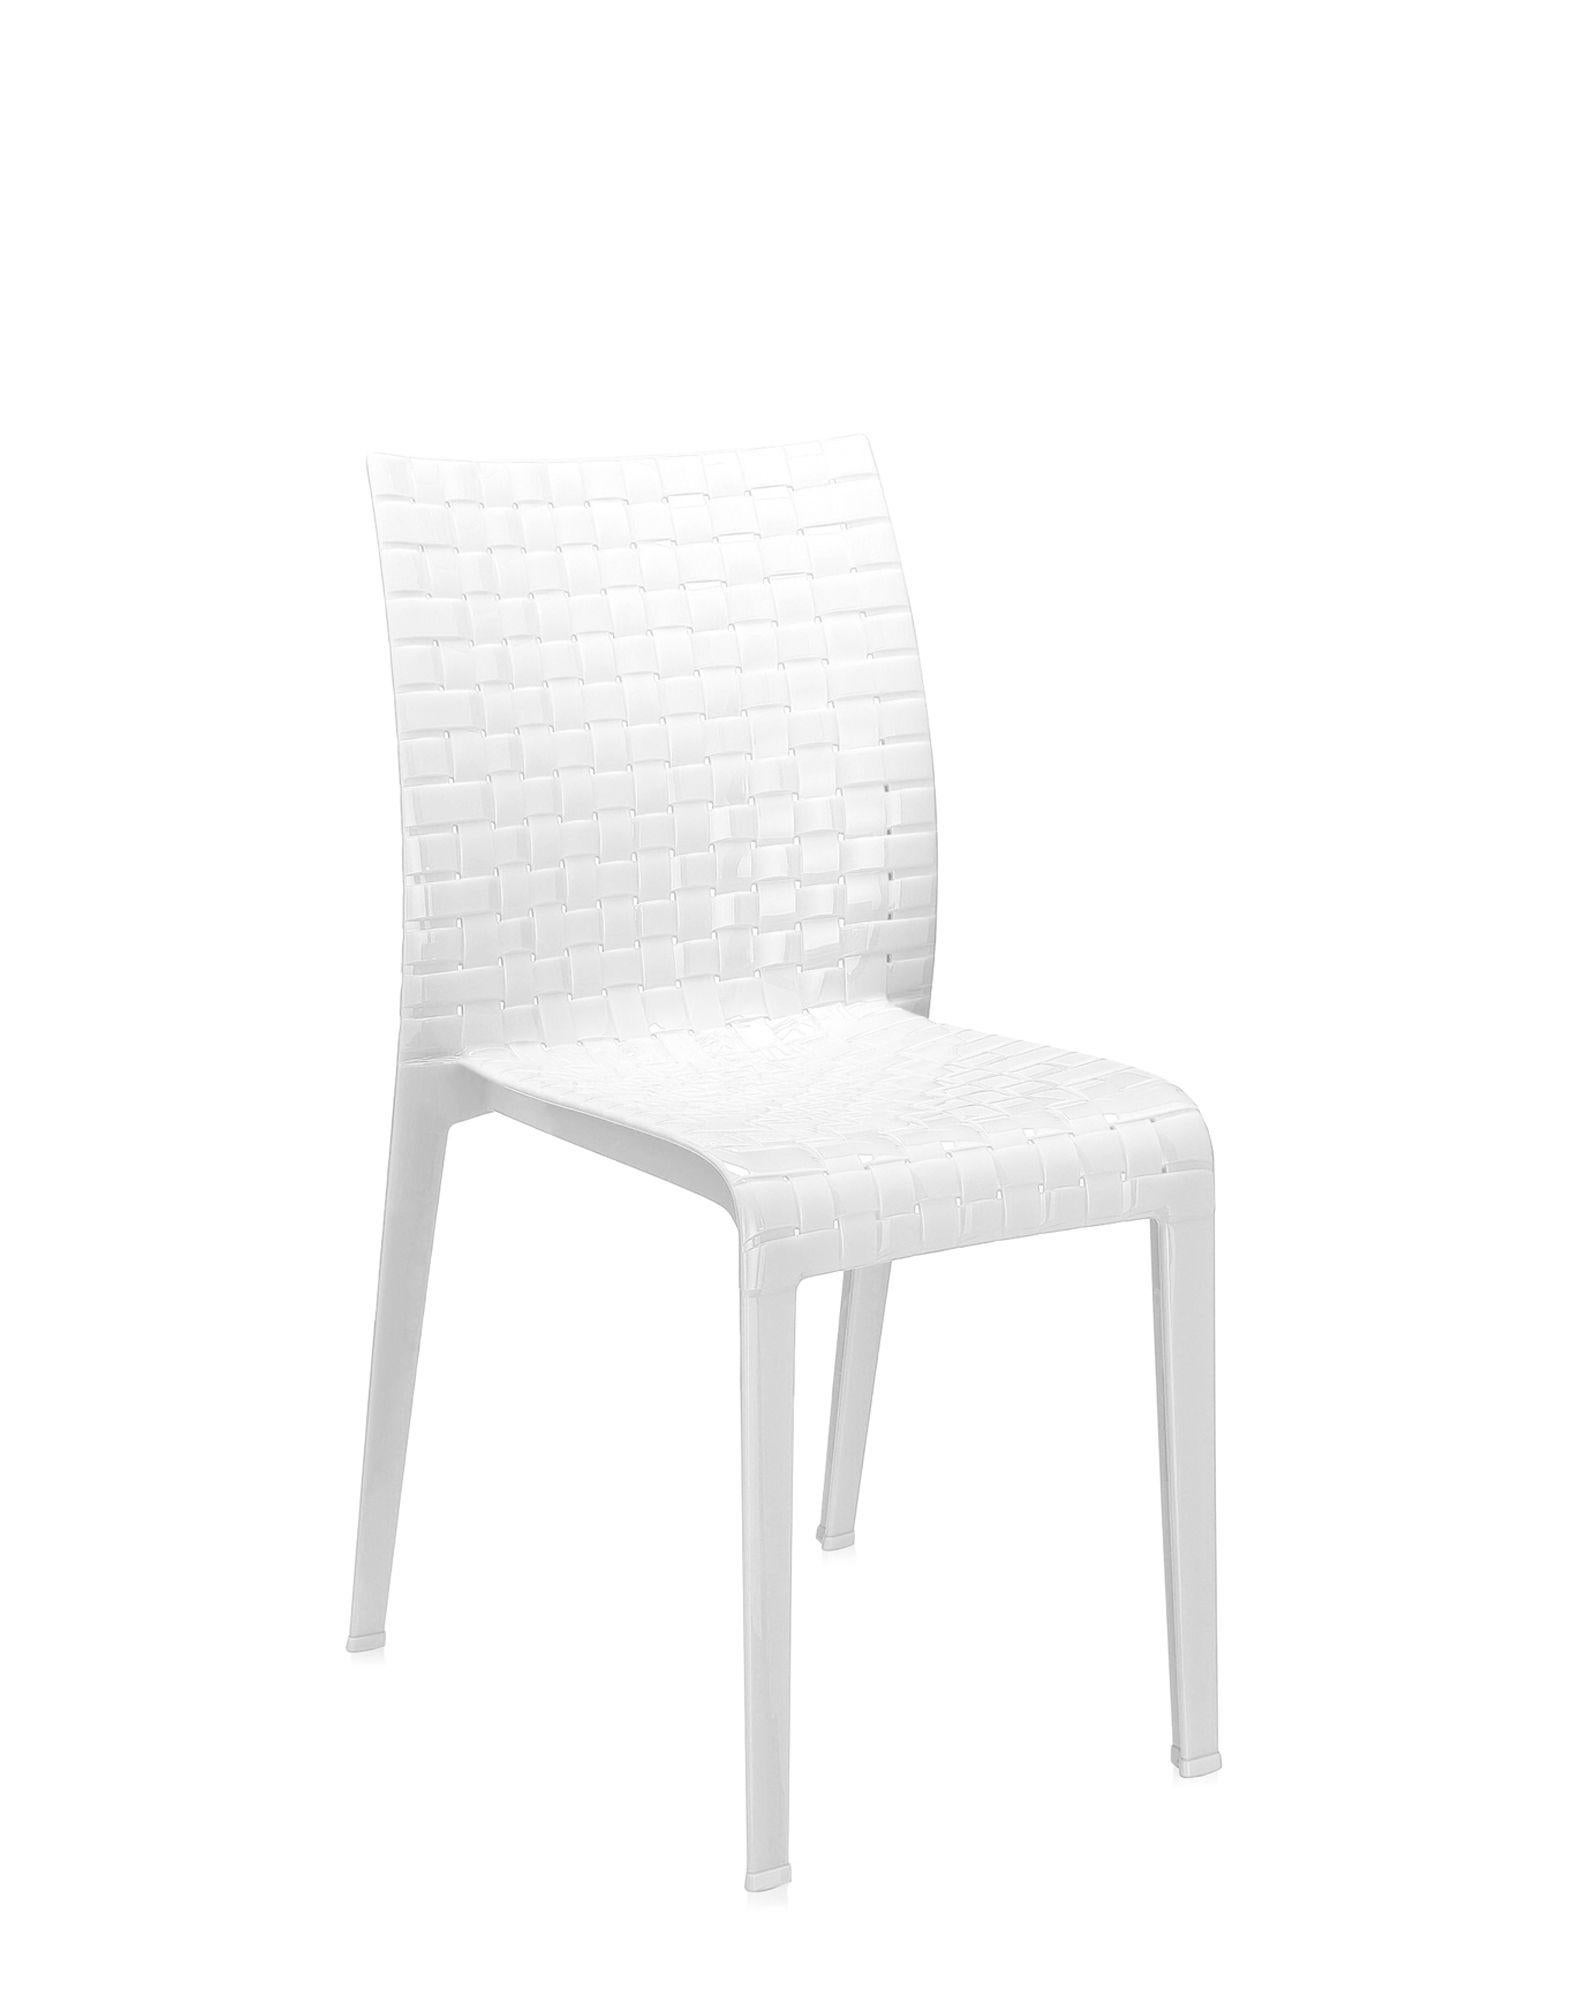 Inspired by the way pattern and texture interweave in a fabric, the Ami Ami chair (its name in Japanese literally means 